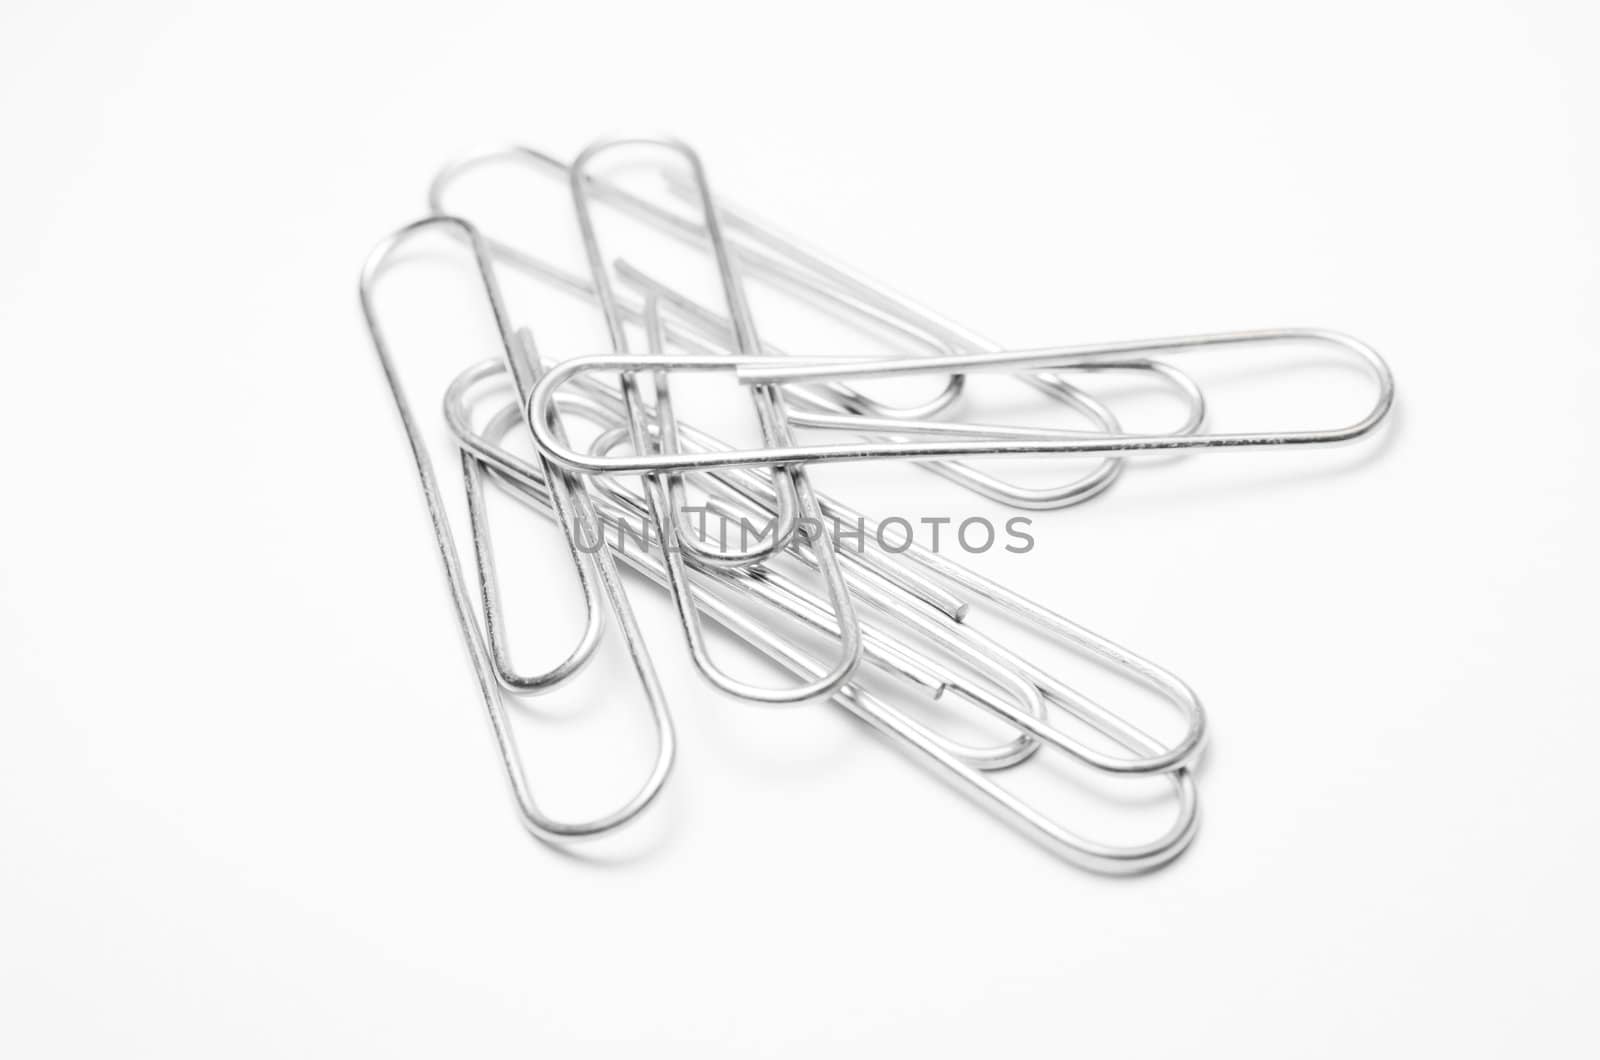 Close-up of paper clips by Rinitka